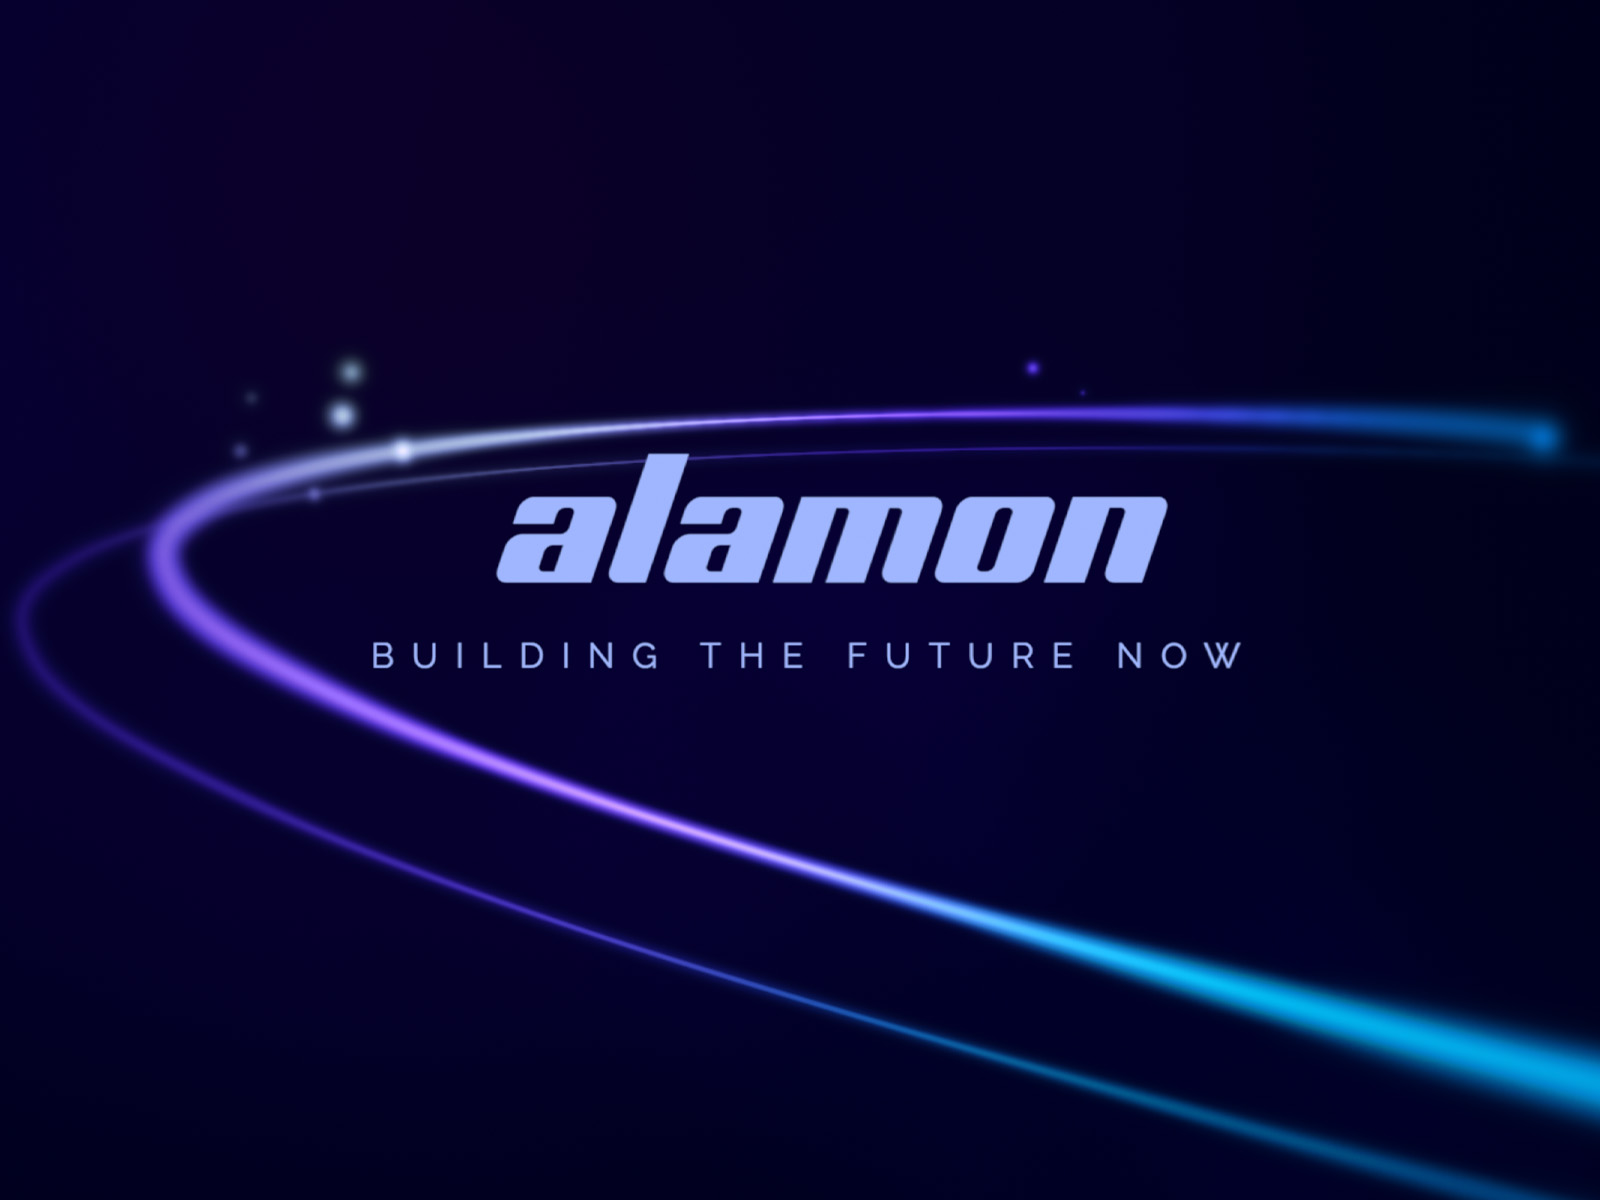 Alamon is Building the Future Now